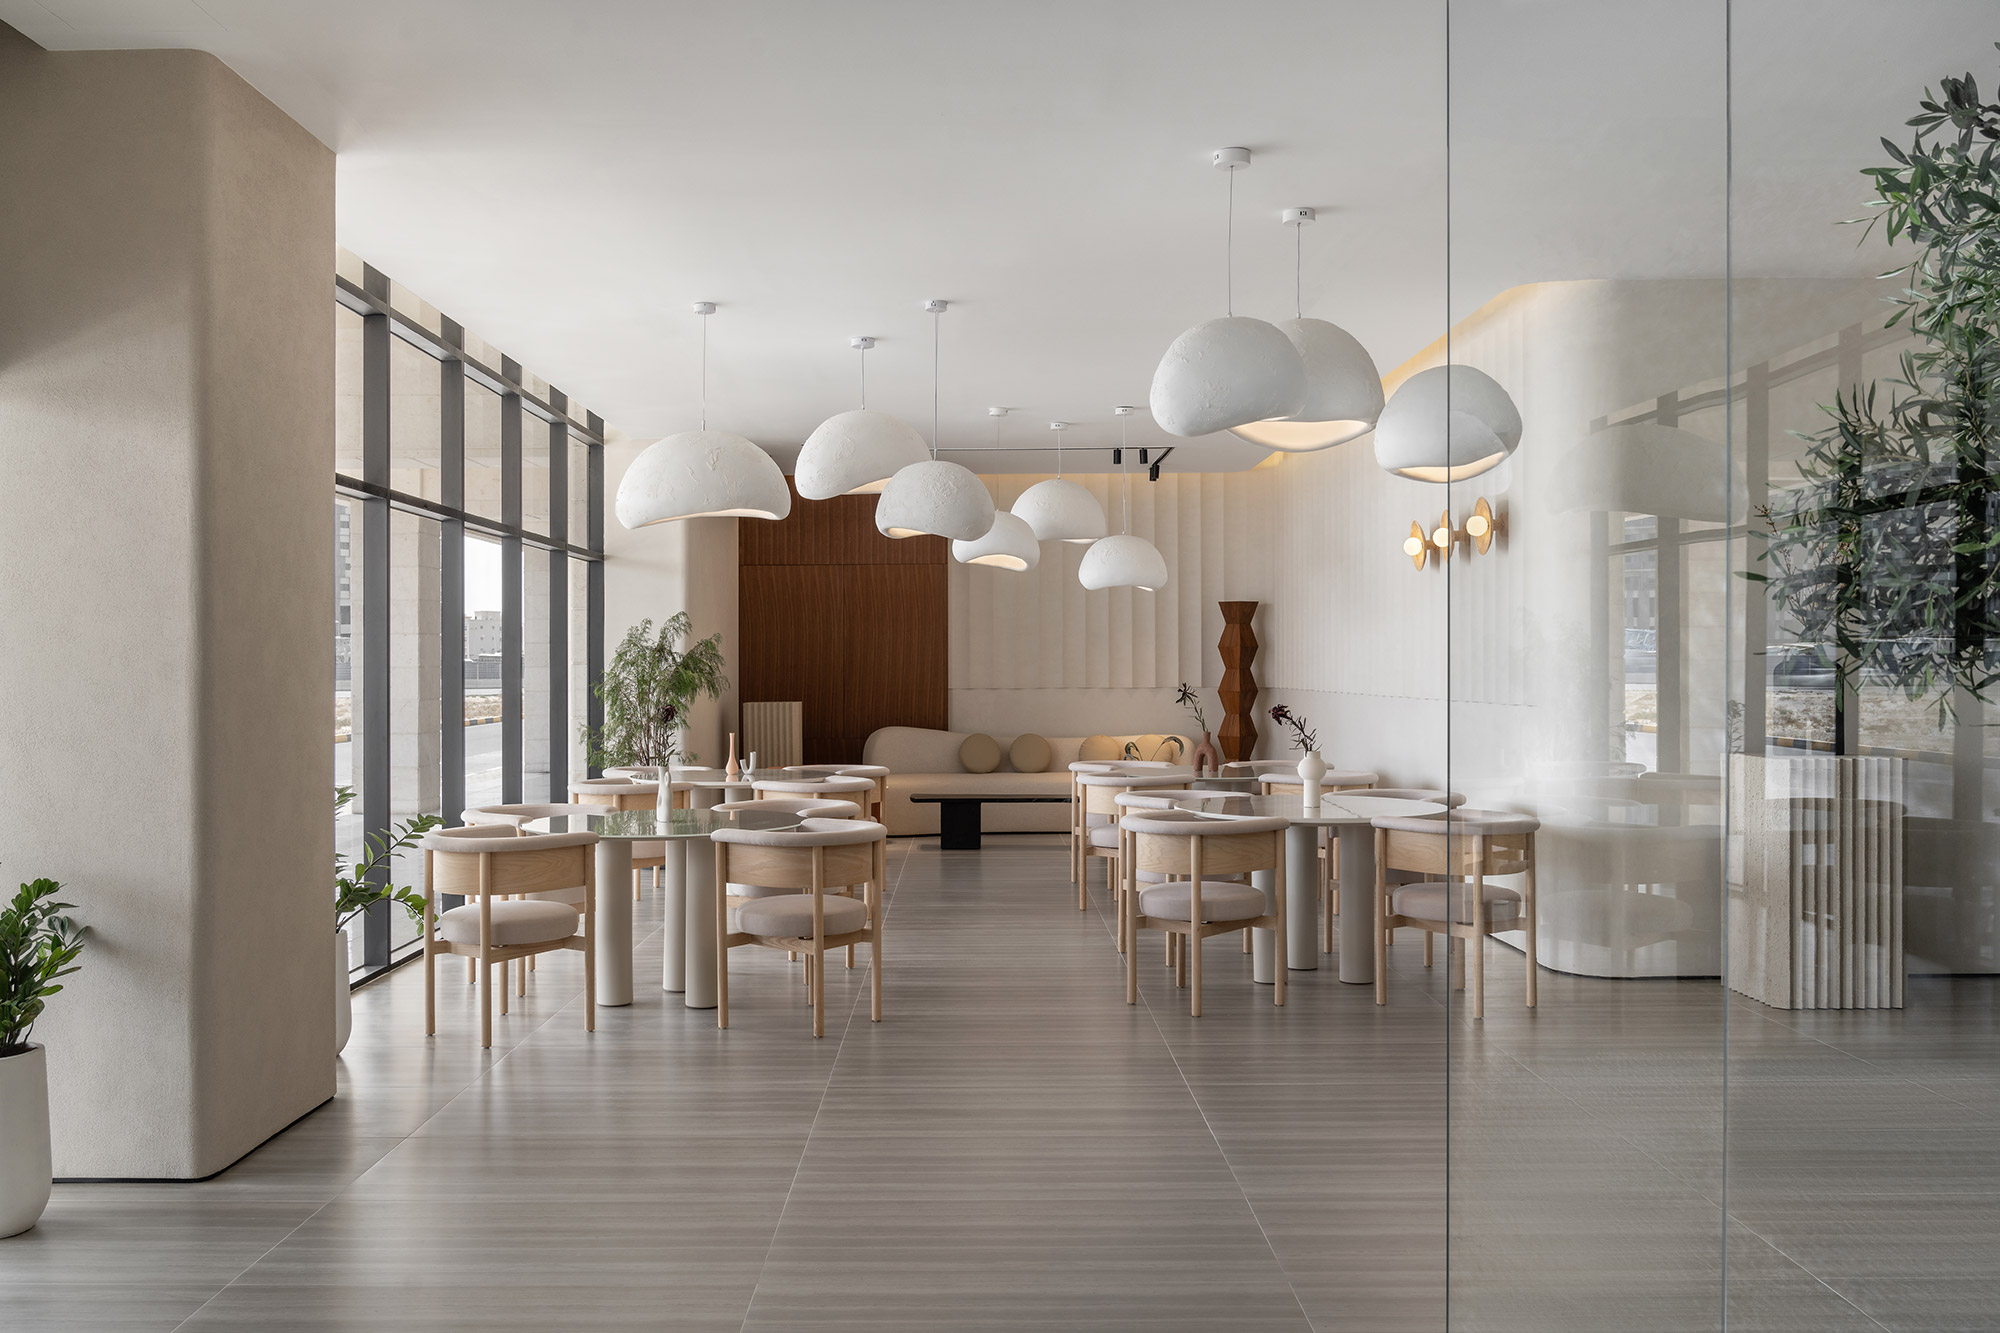 Image of The House by Cest ici Design 3 1 in Tables with Dekton Bergen for coffee lovers in a cozy Emirati space - Cosentino